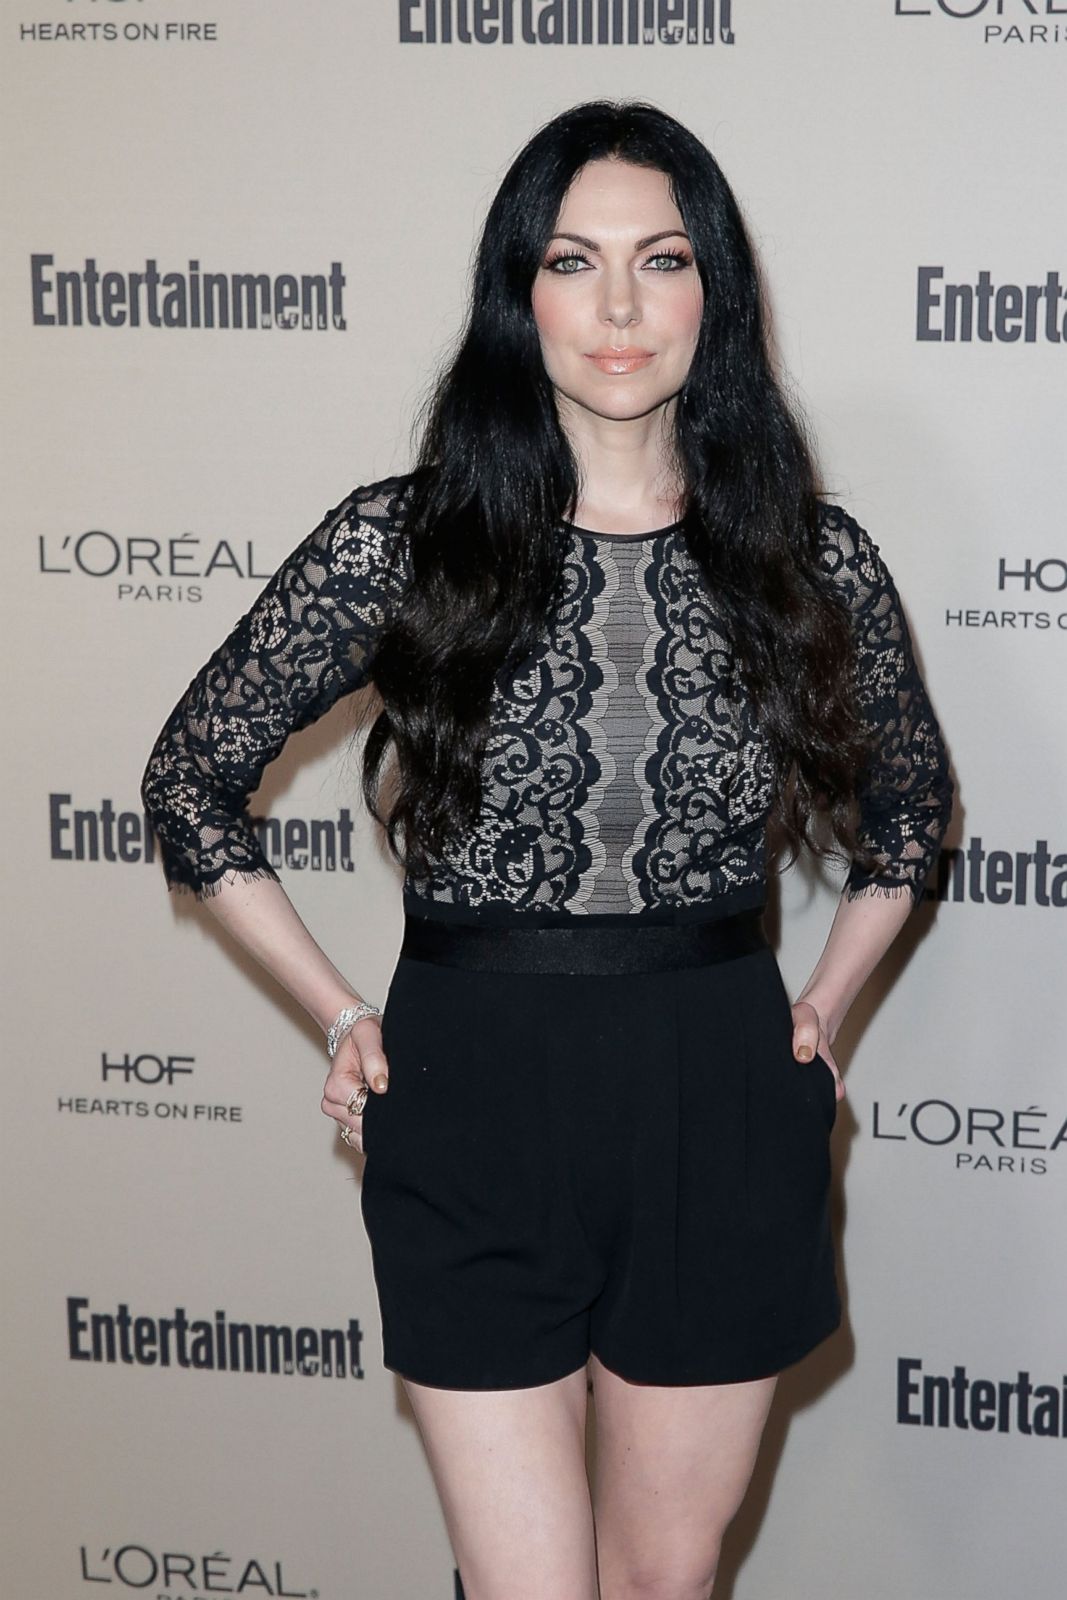 Laura Prepon Picture | 12 Celebrities Who've Been Affiliated With the Church of ...